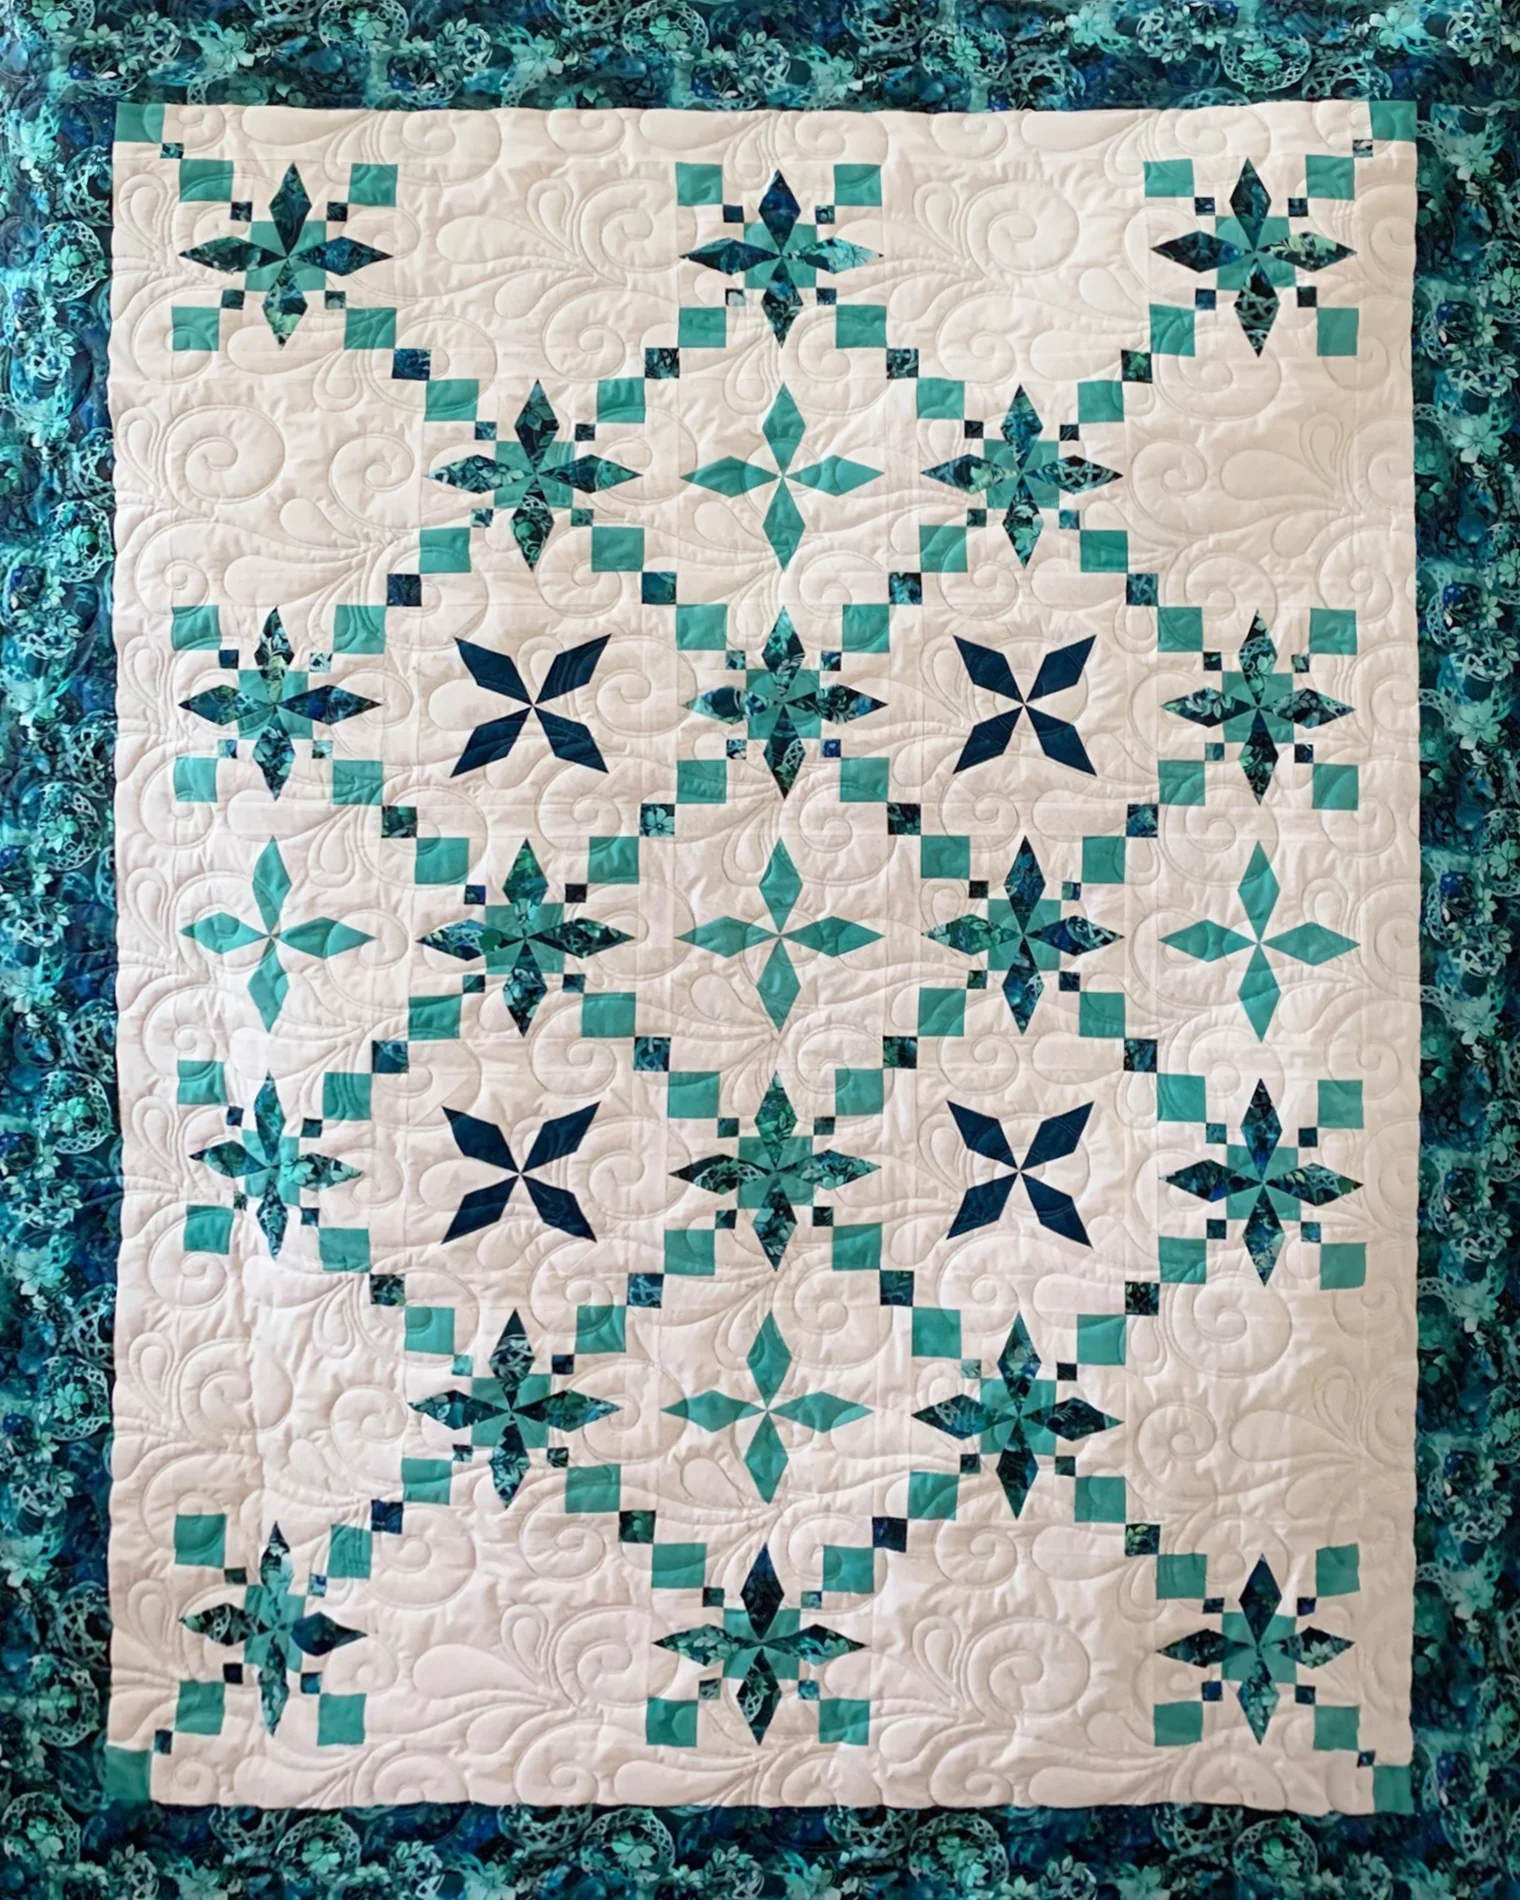 Studio 180 Design Emerald Isle Quilting Pattern DTP079 for Sale at World Weidner